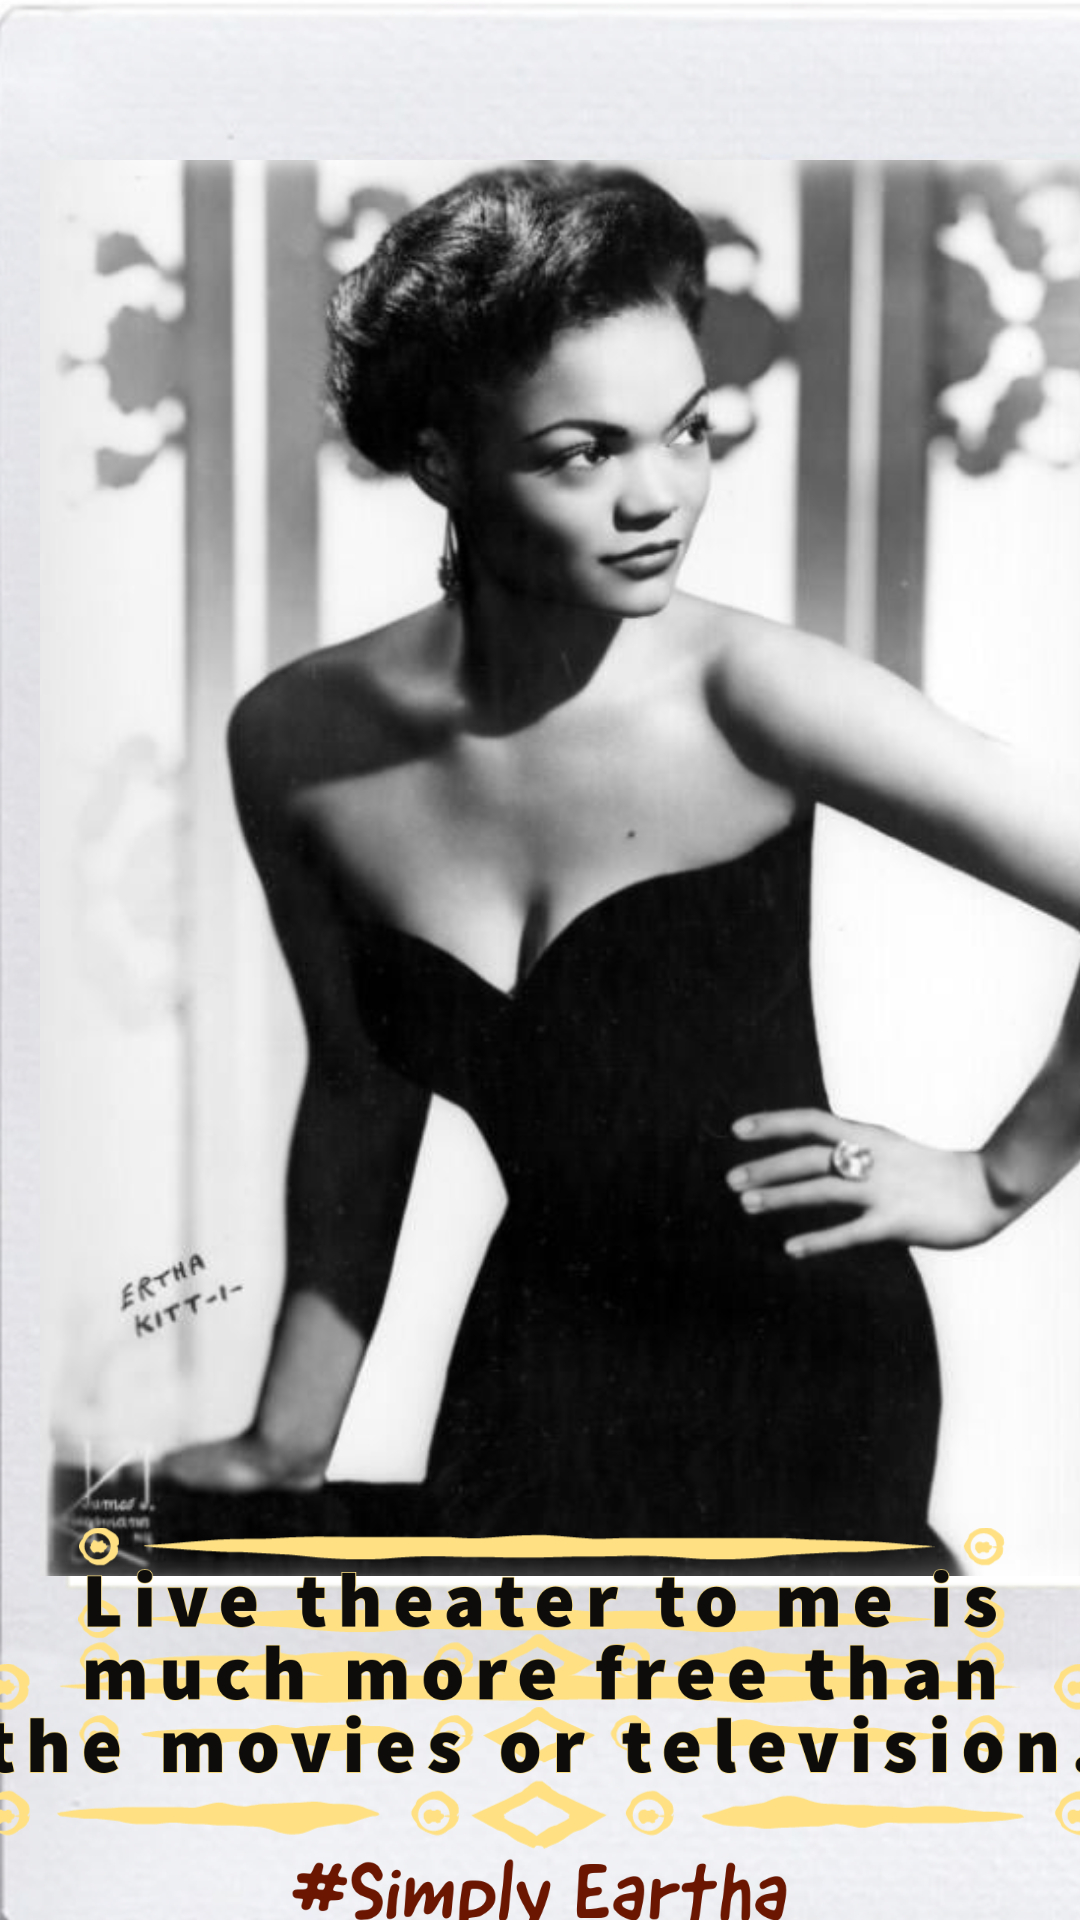 #Simply Eartha #Simply Eartha Live theater to me is much more free than the movies or television.